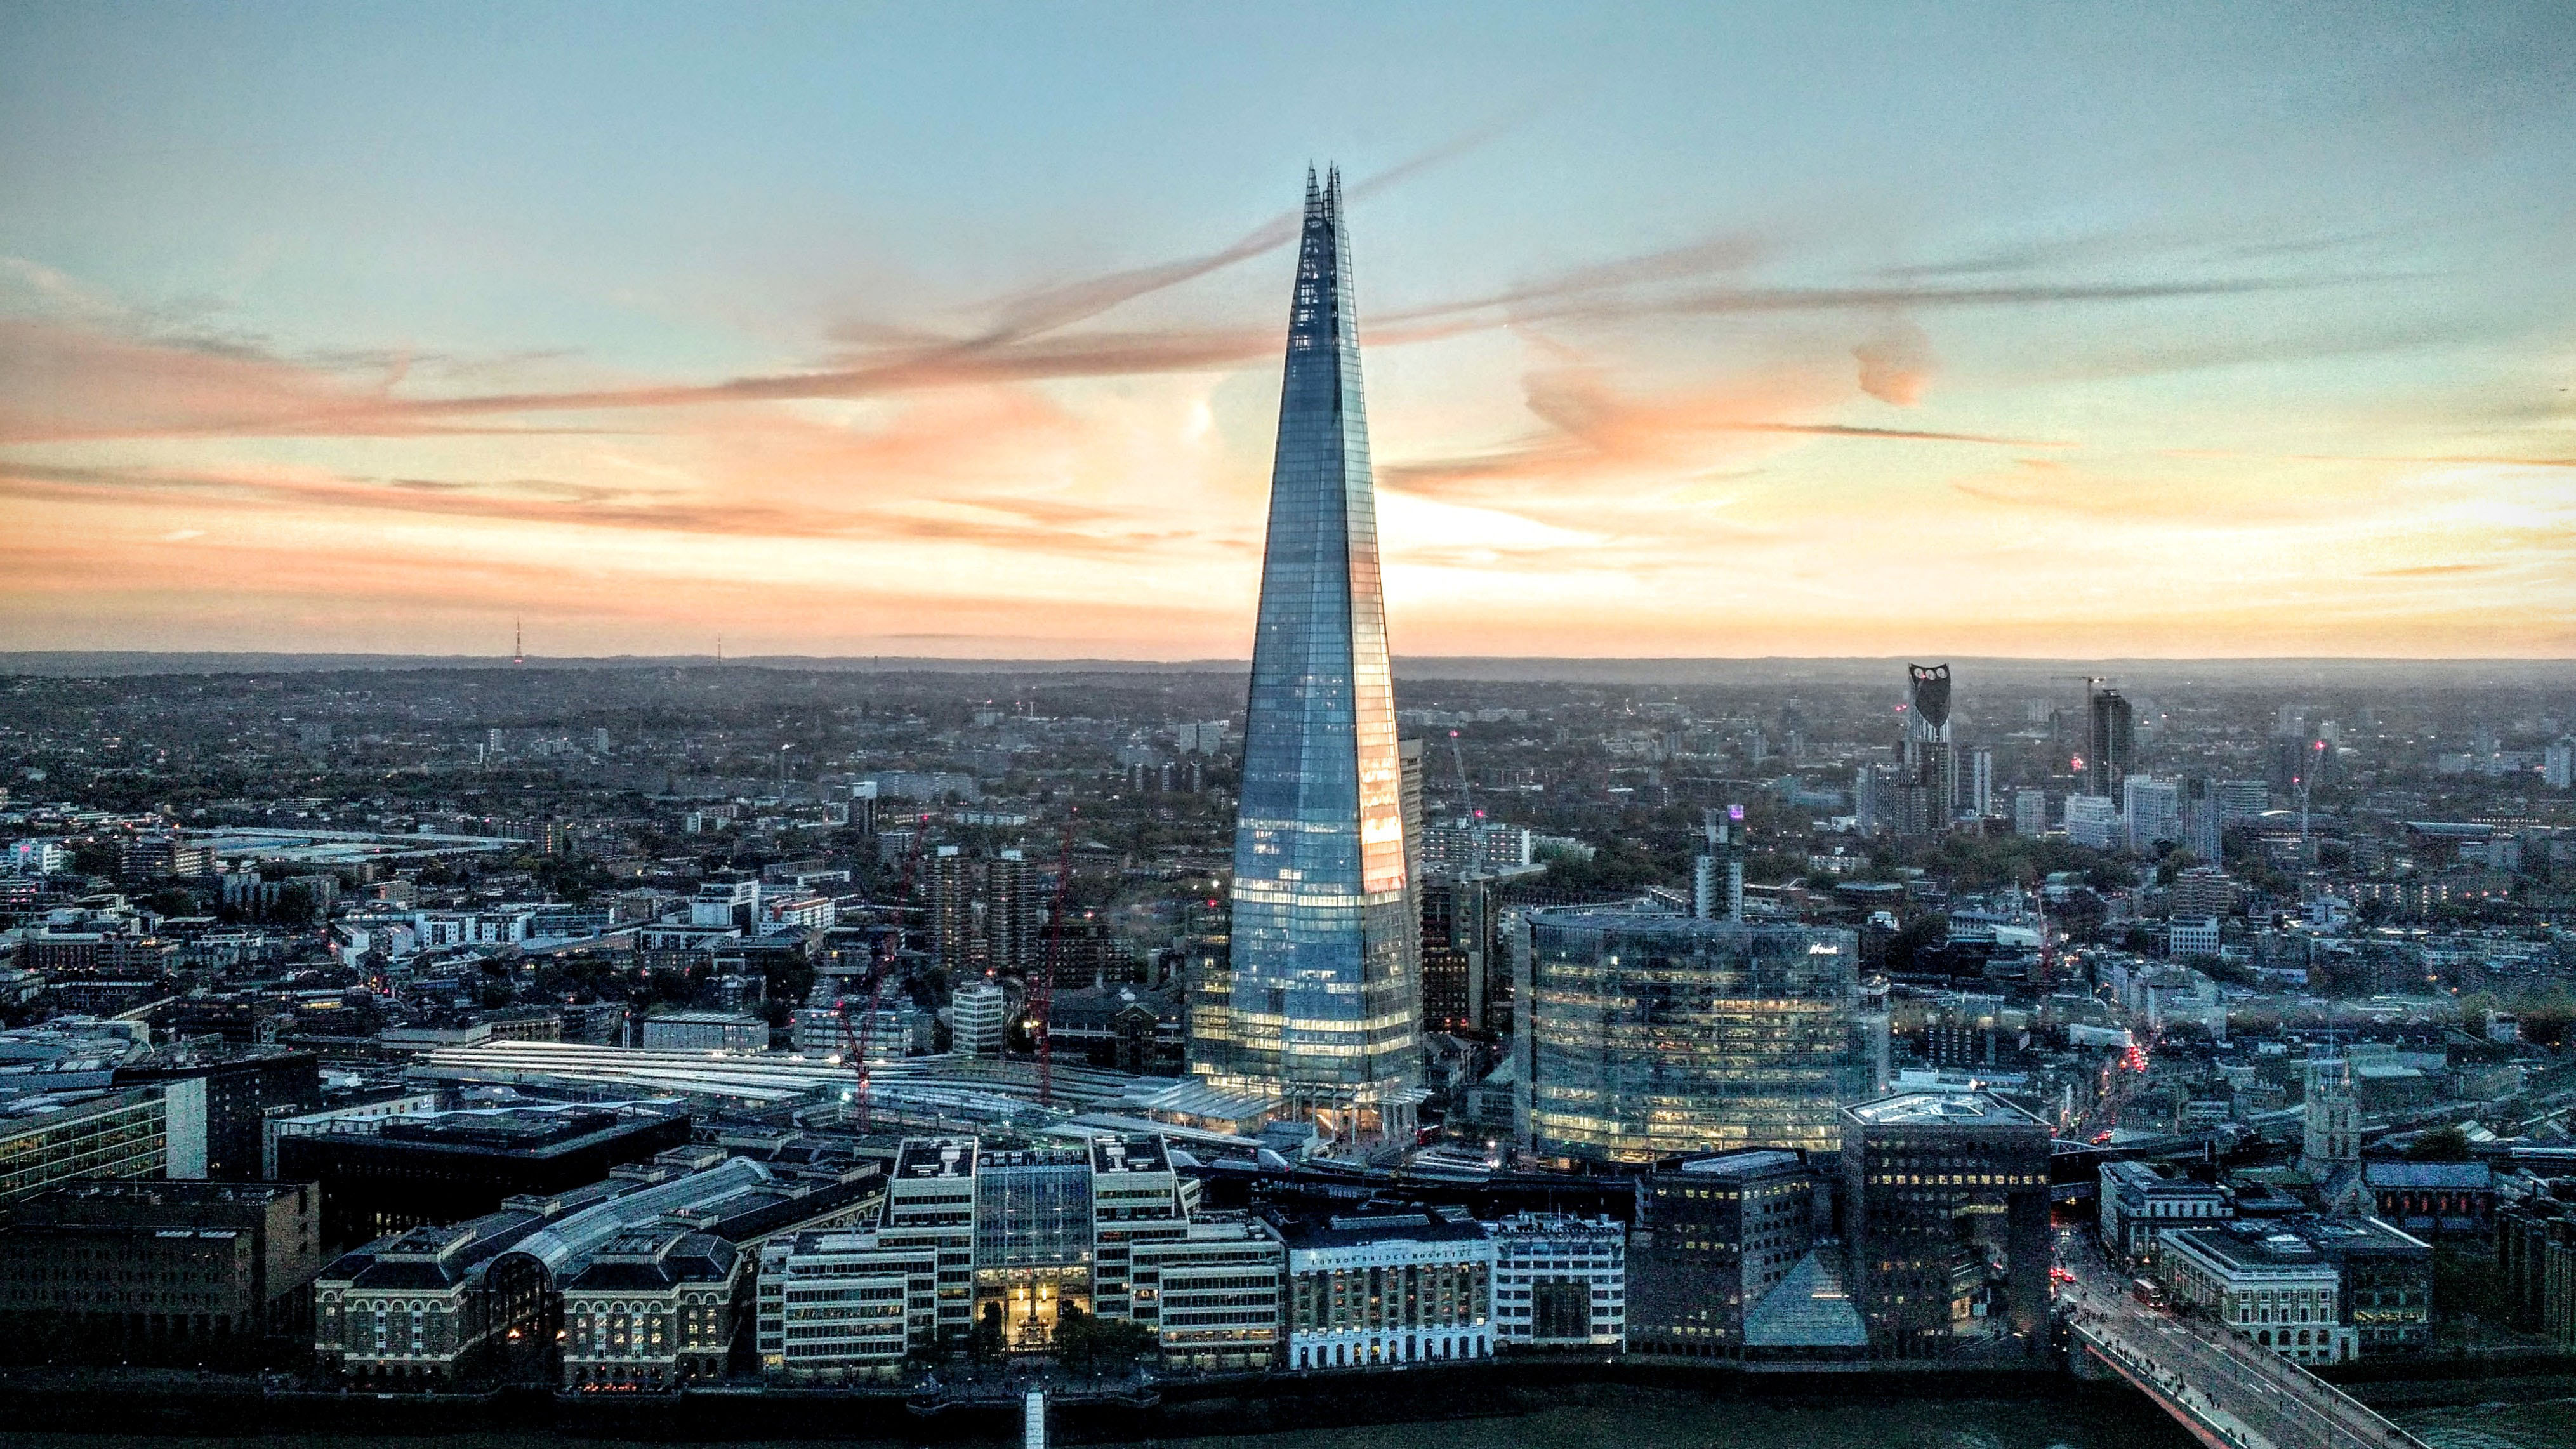 The London skyline at sunset centering The Shard (photo by Fred Moon on Unsplash)